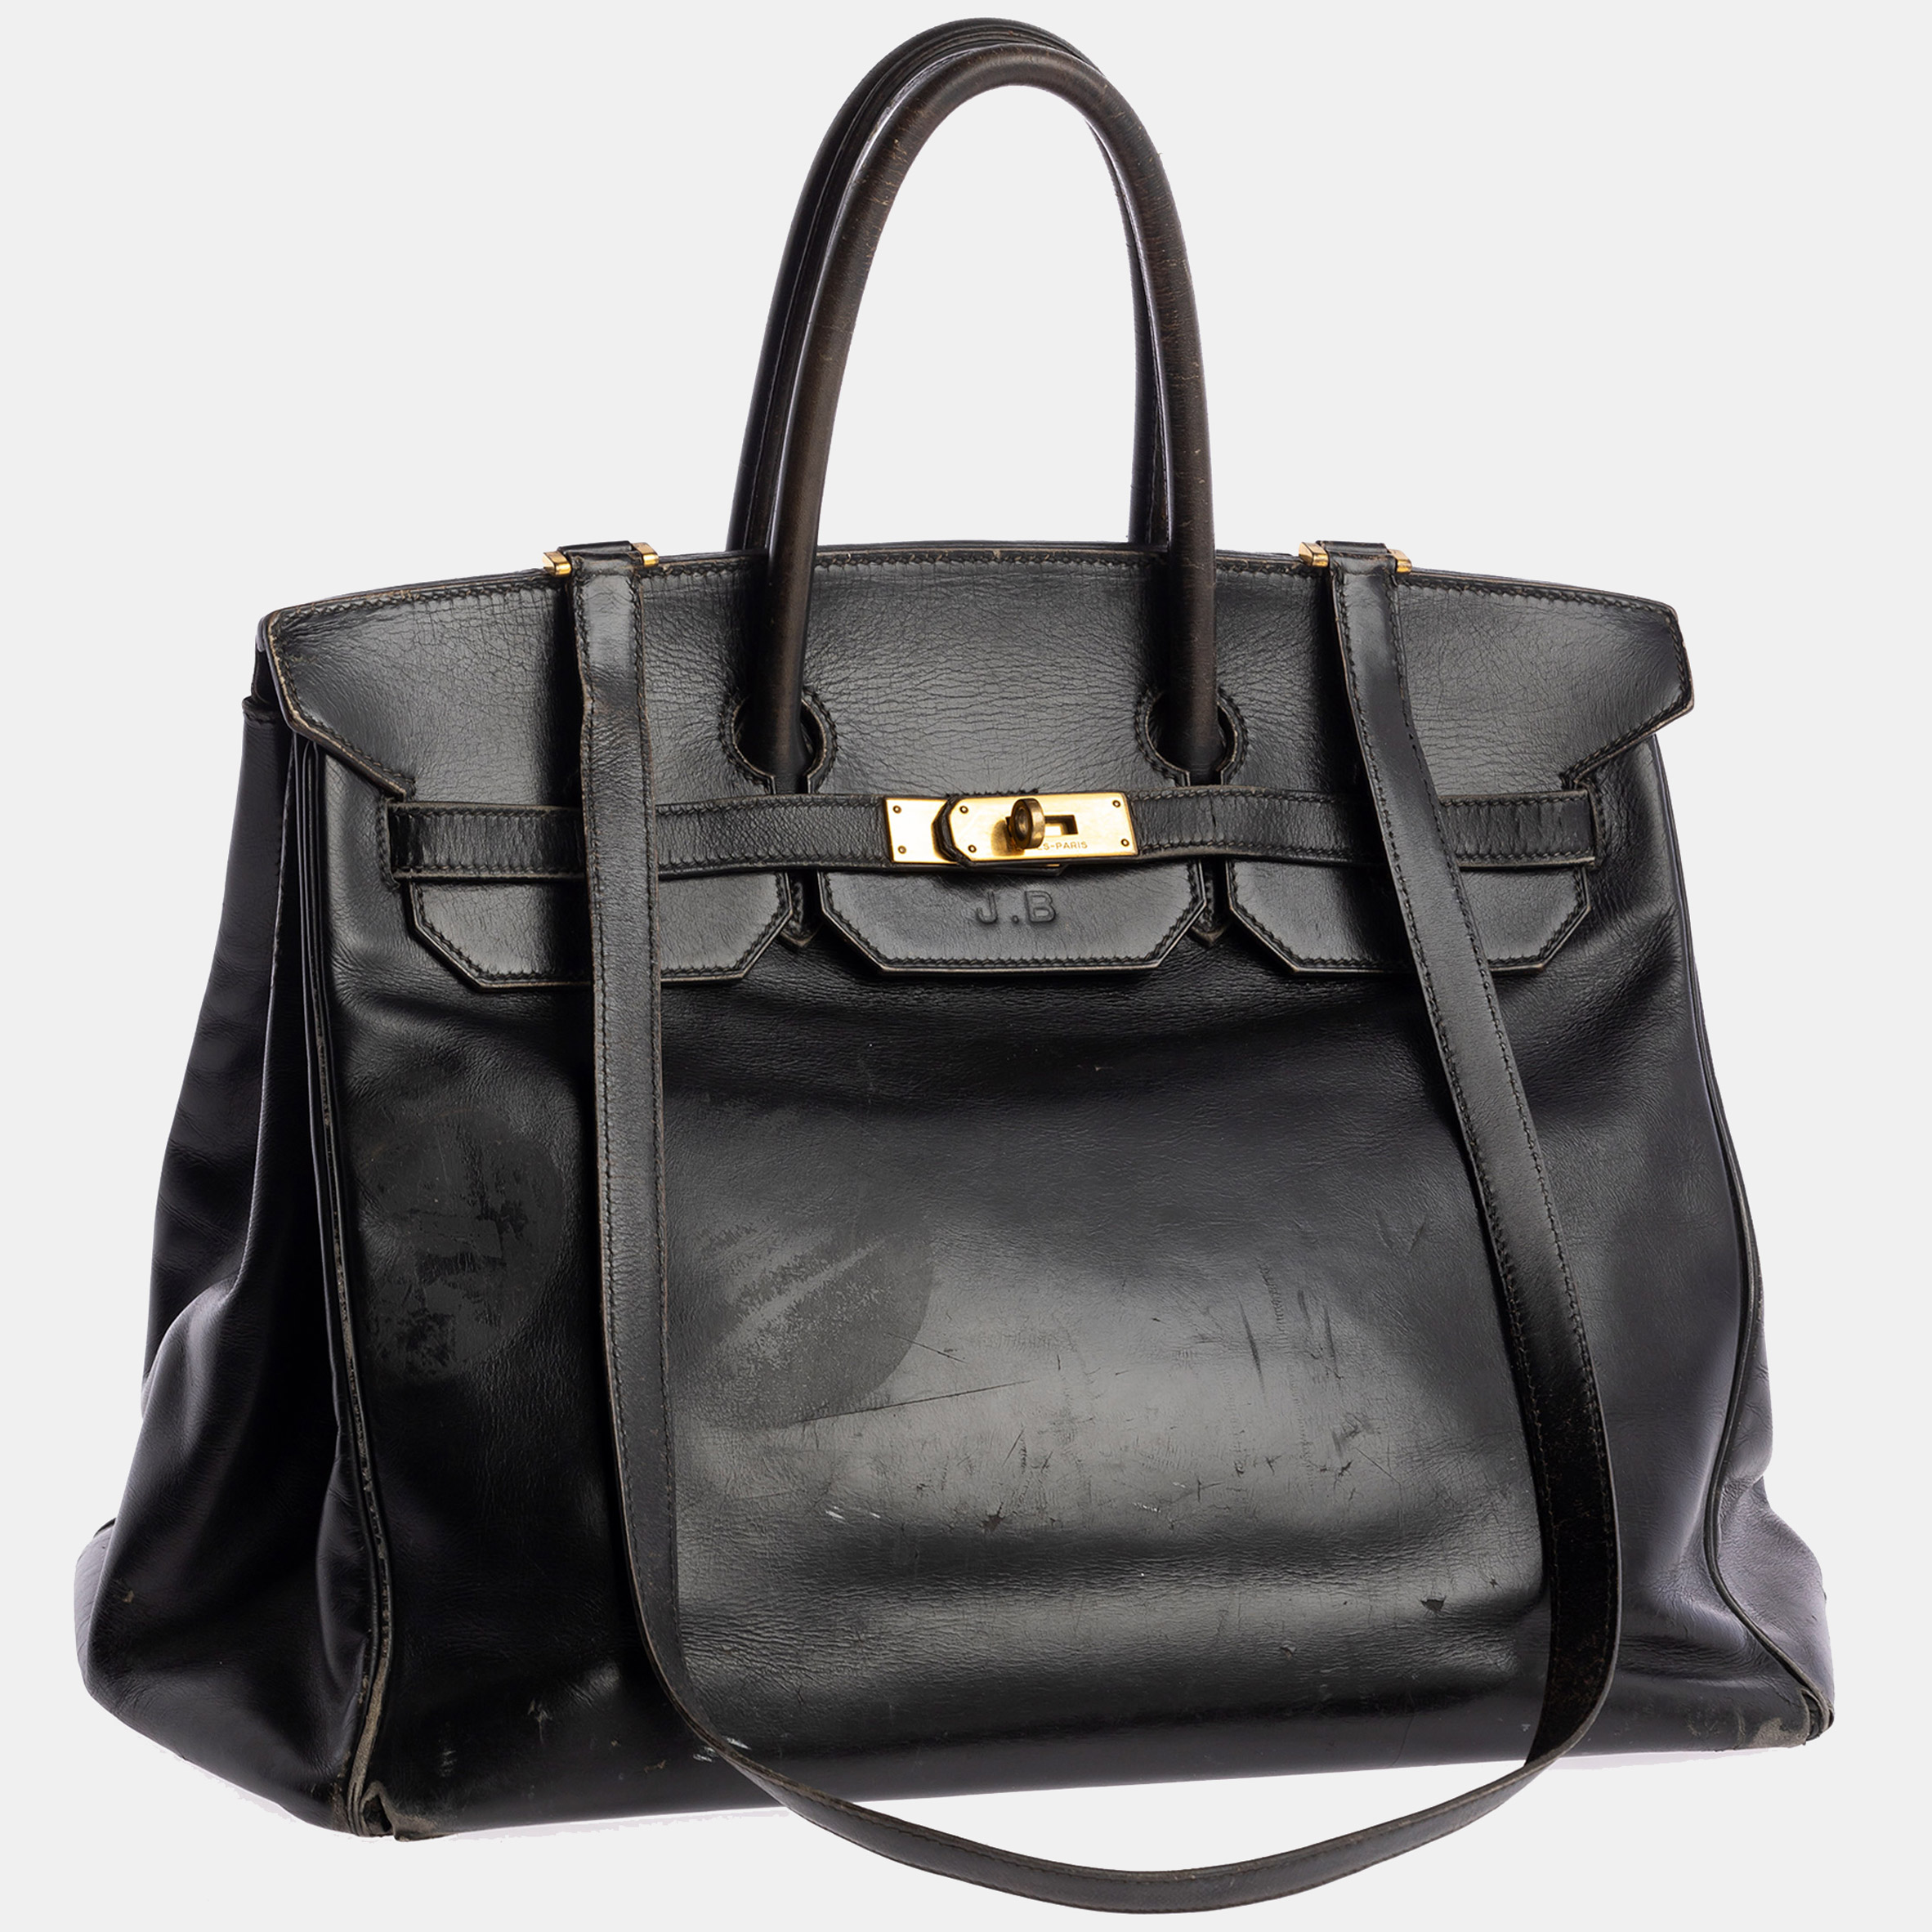 Jane Birkin's Birkin bag by Hermes from the Bags: Inside Out exhibition at the V&A